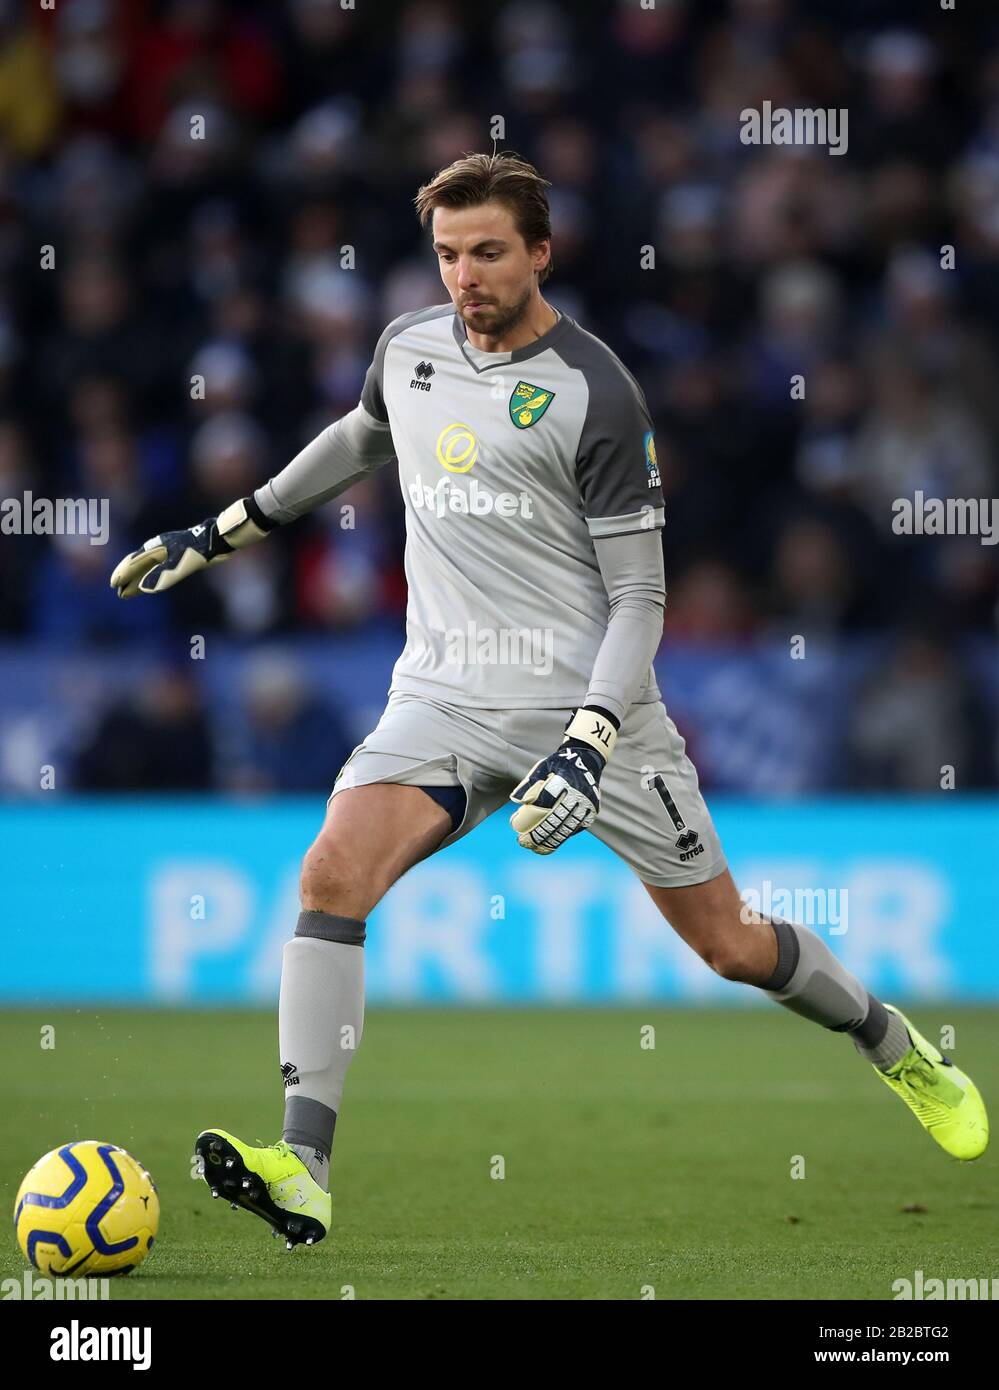 Norwich City goalkeeper Tim Krul during the Premier League match at King Power Stadium, Leicester. Stock Photo